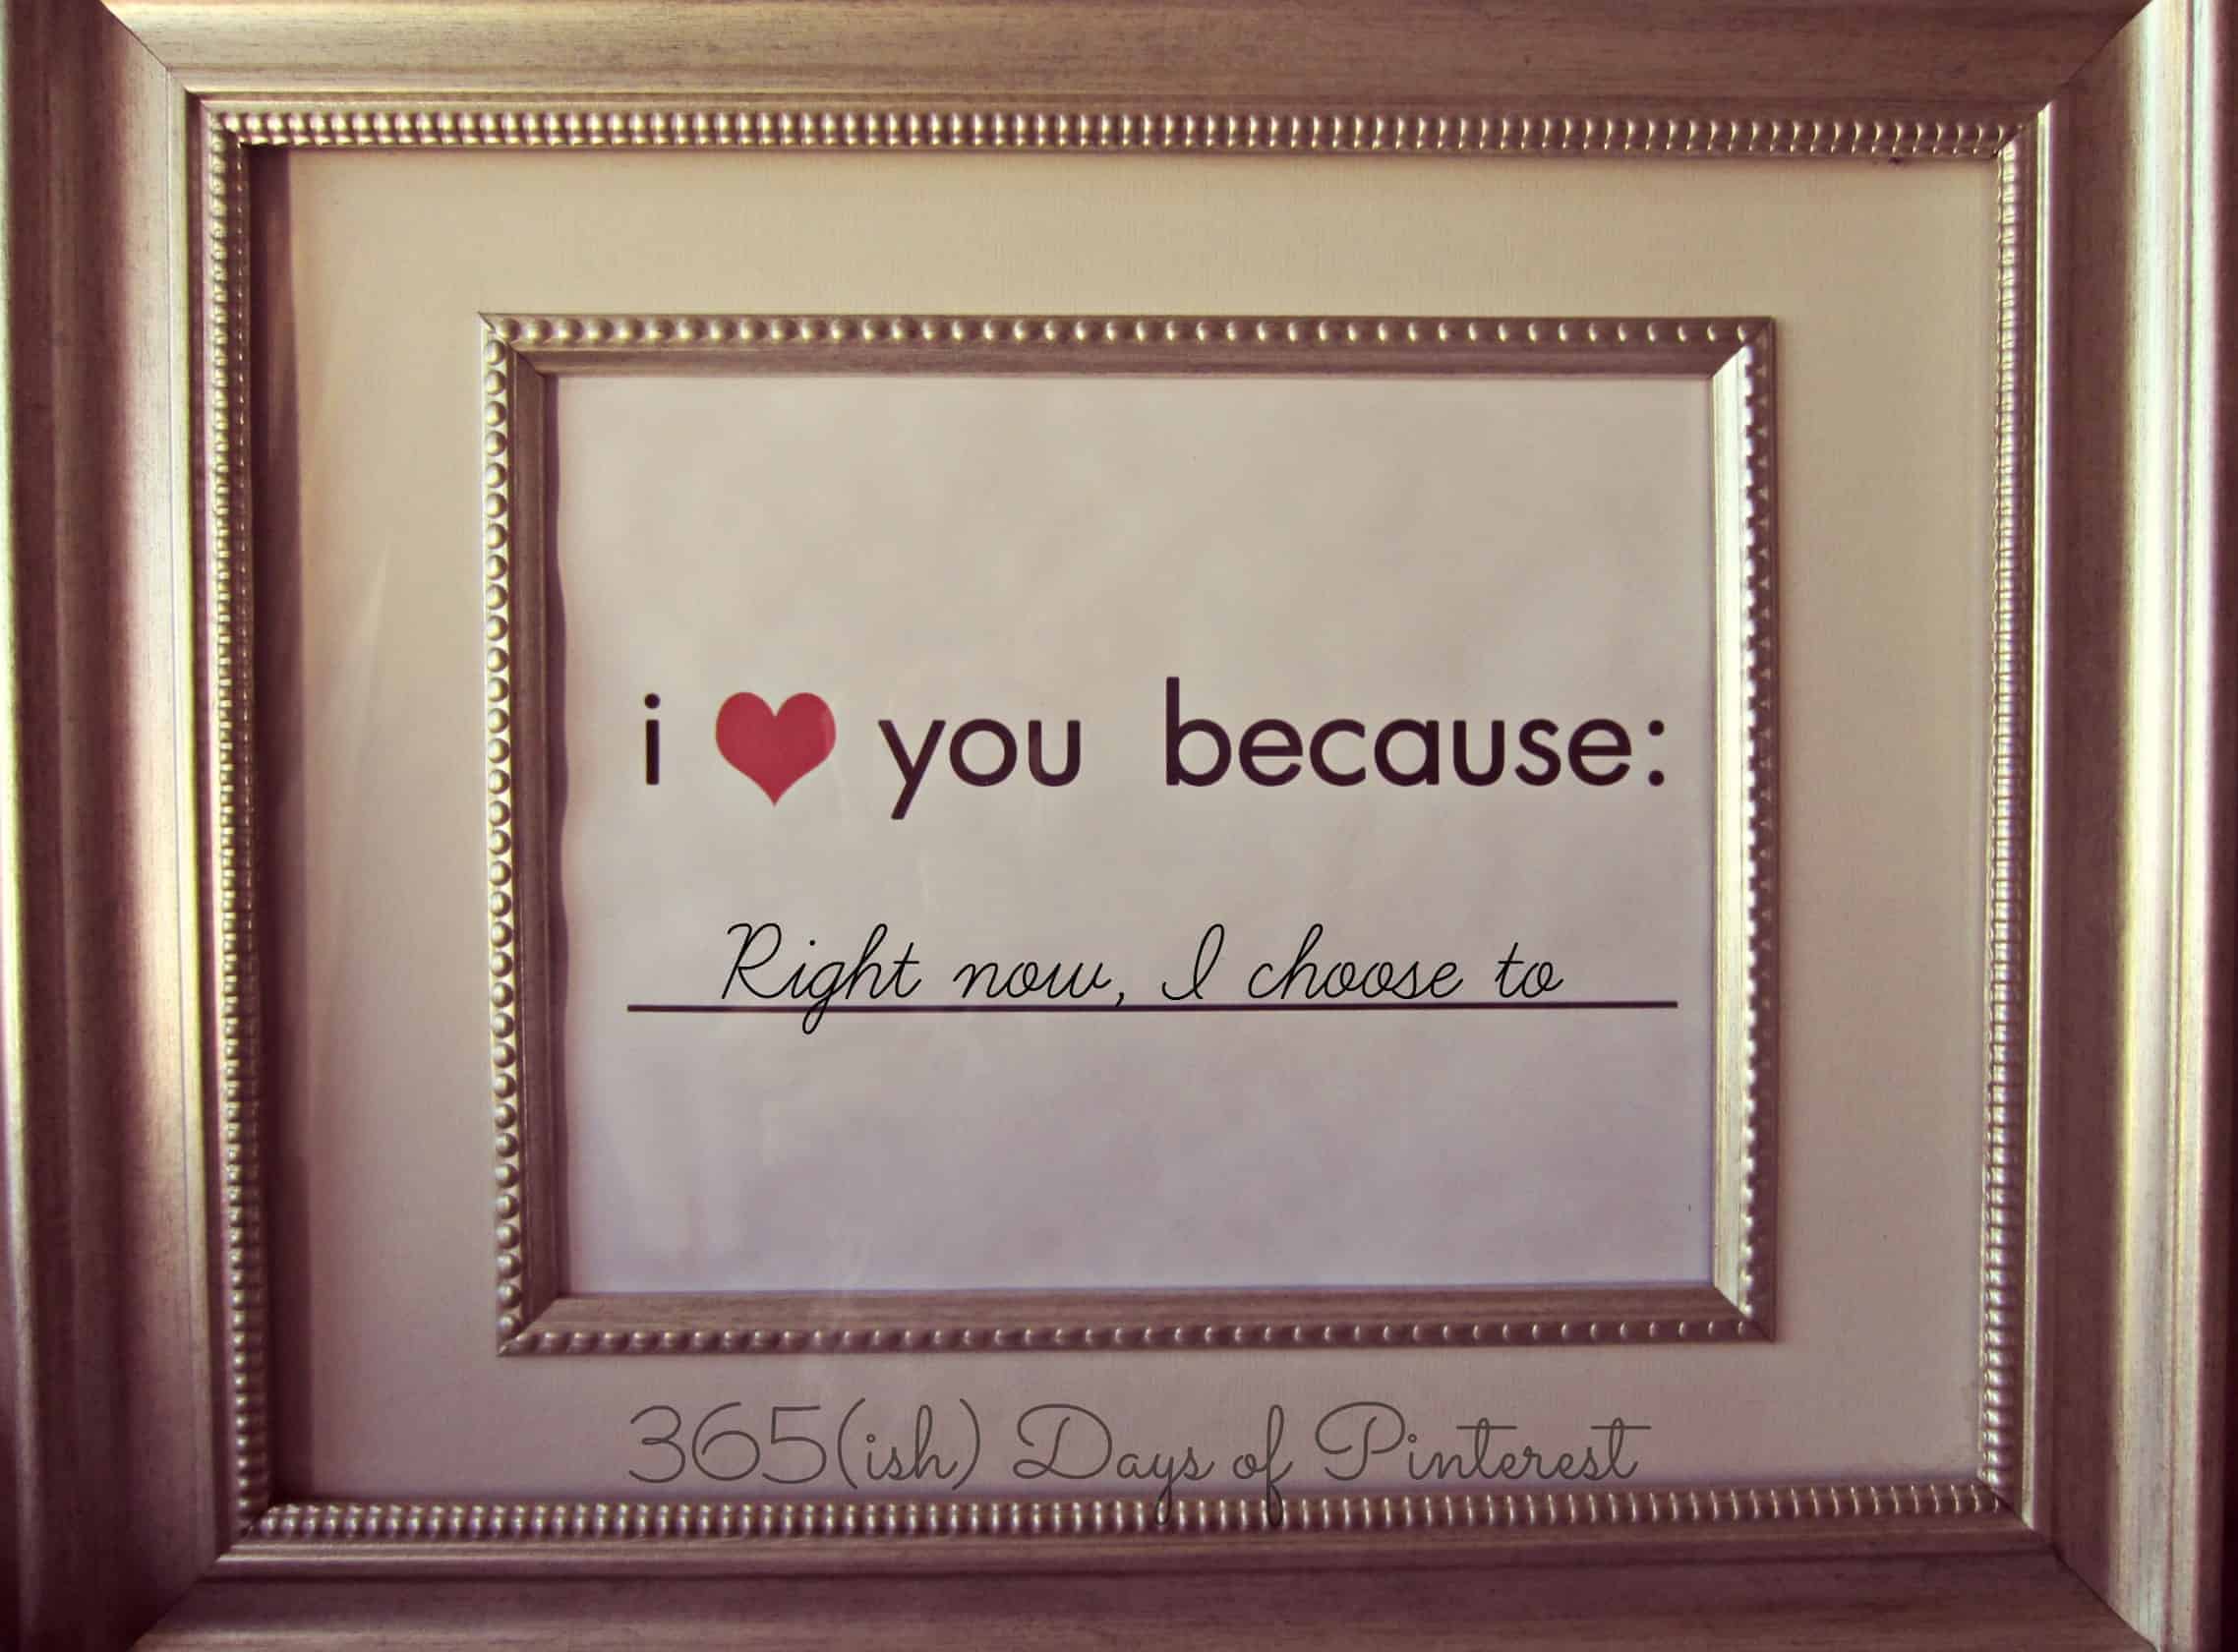 I love you because picture frame